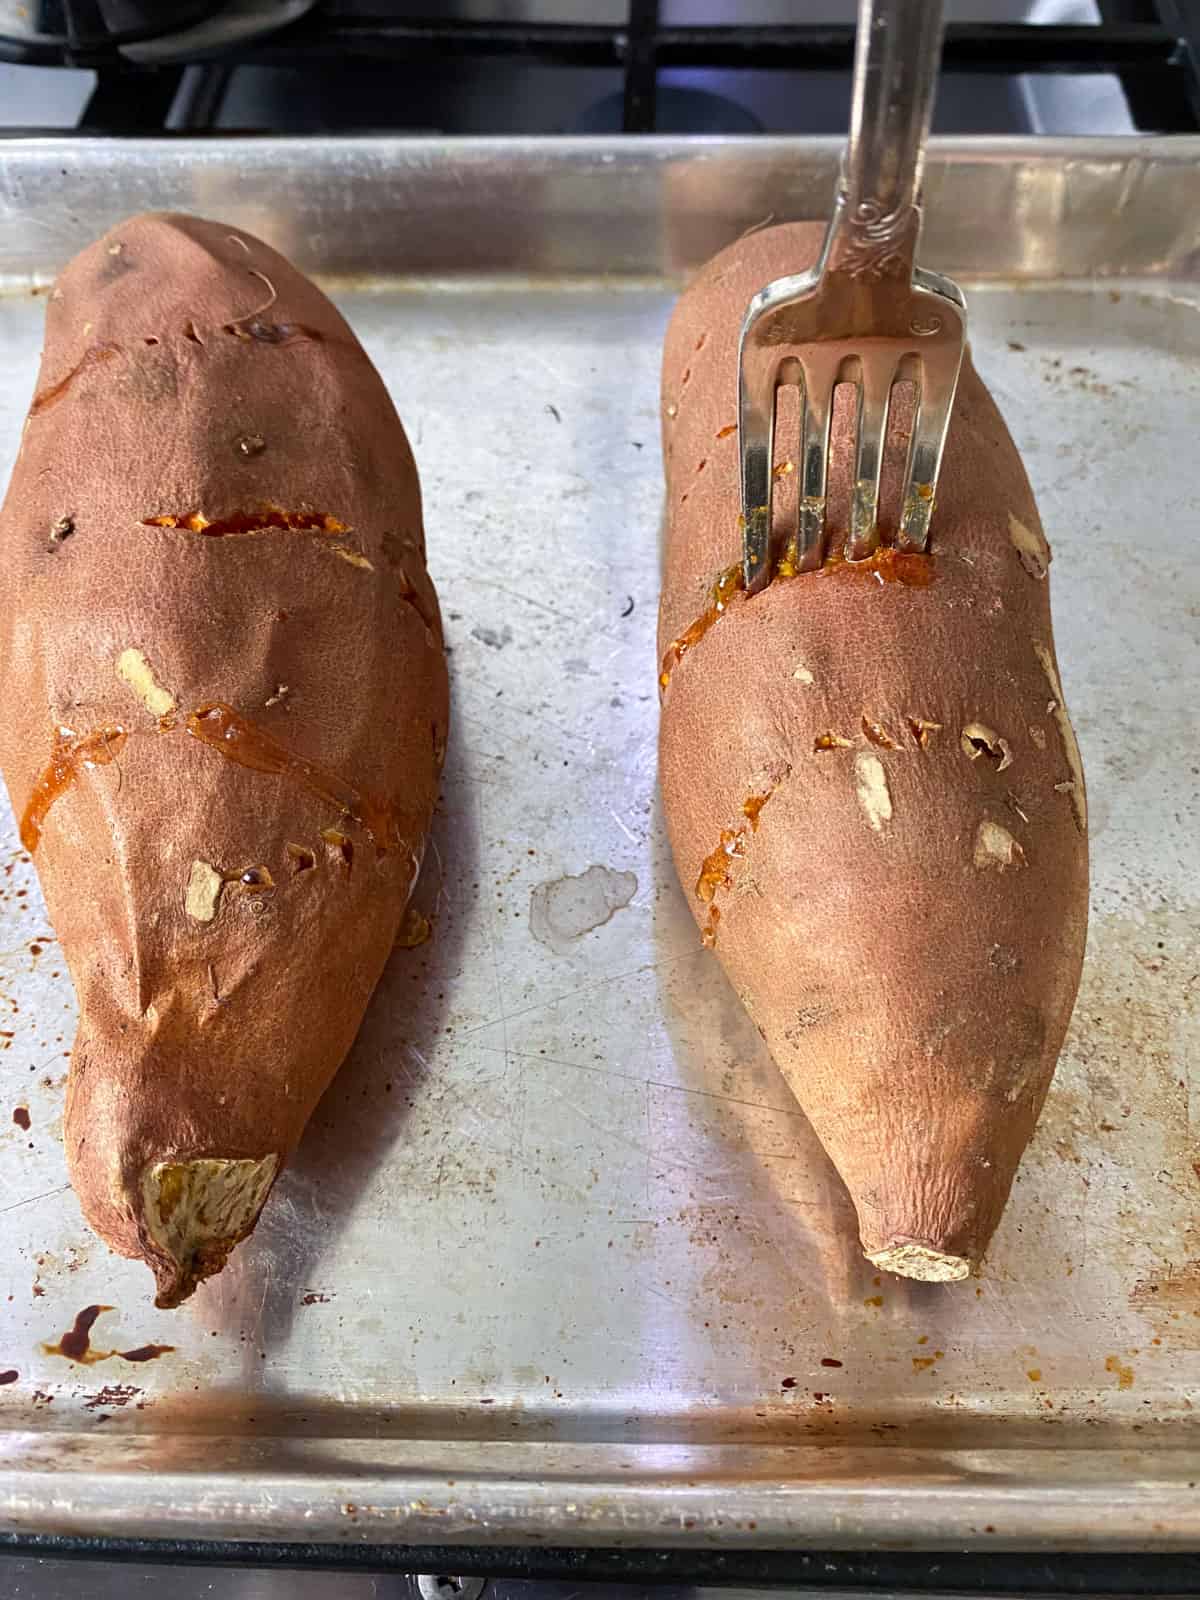 Bake the sweet potatoes until cooked through and they can be easily pierced with a fork.